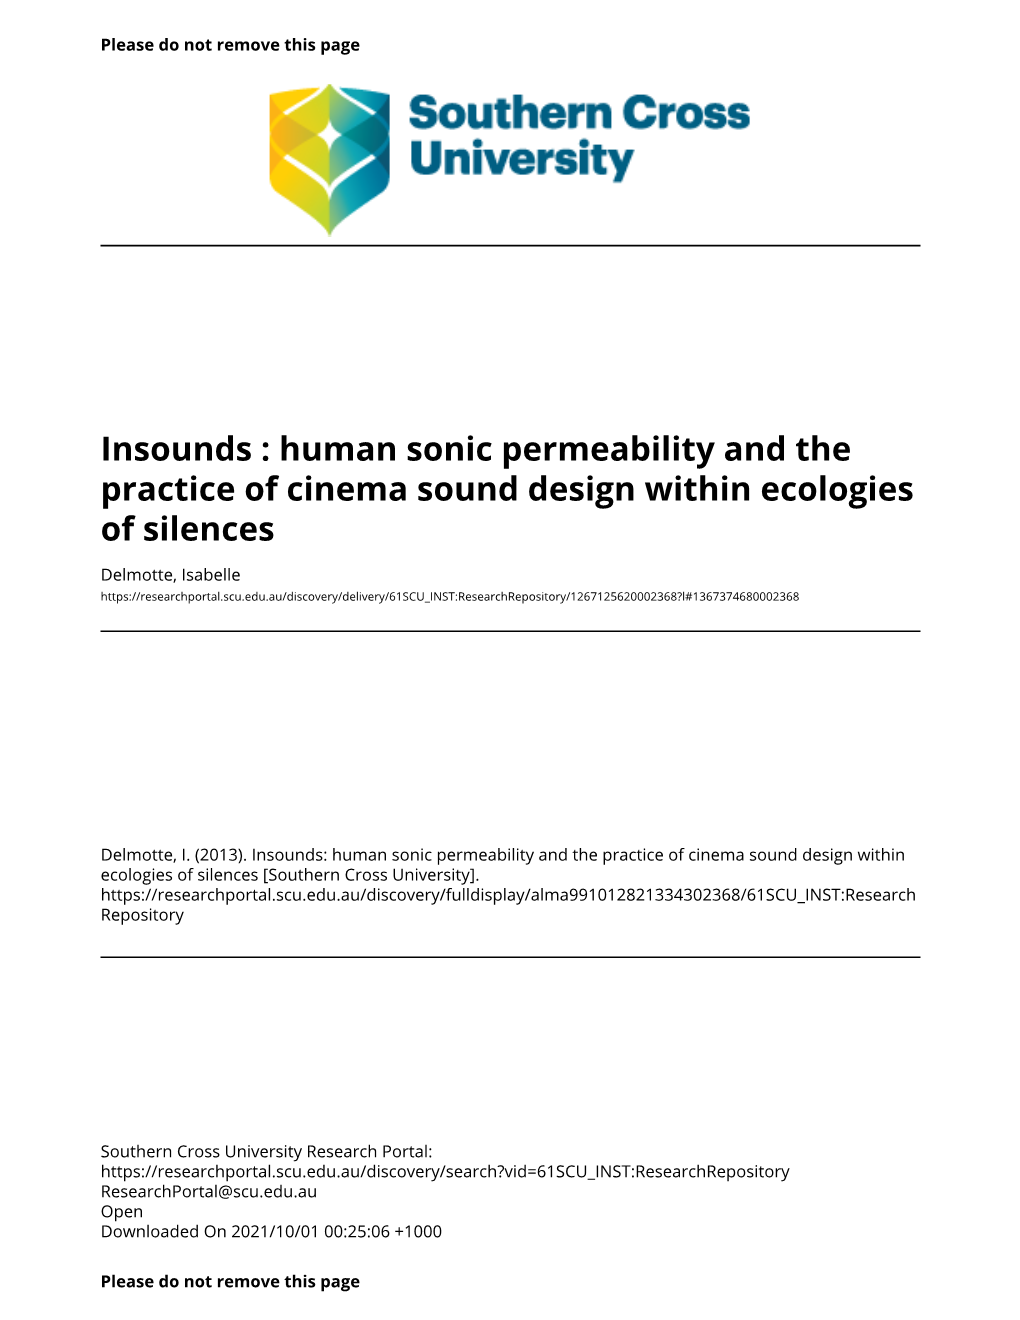 Human Sonic Permeability and the Practice of Cinema Sound Design Within Ecologies of Silences